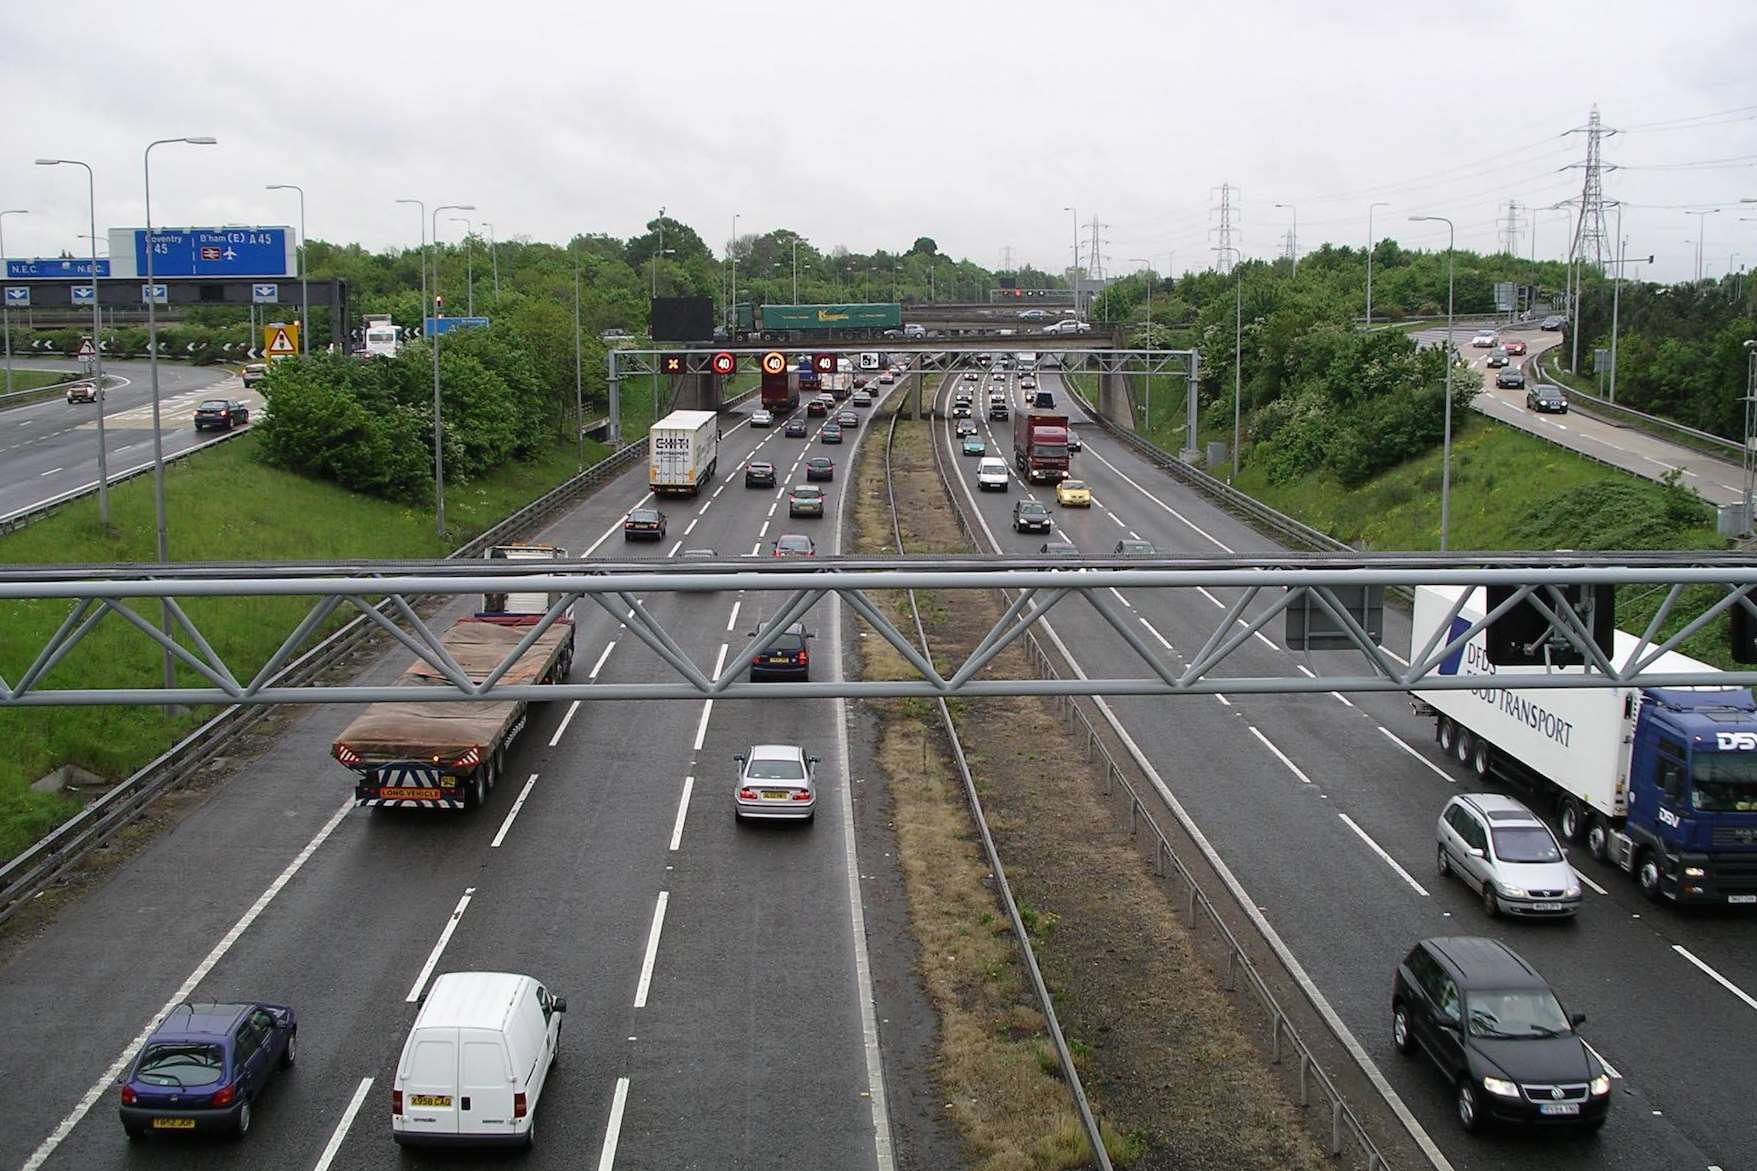 A typical motorway